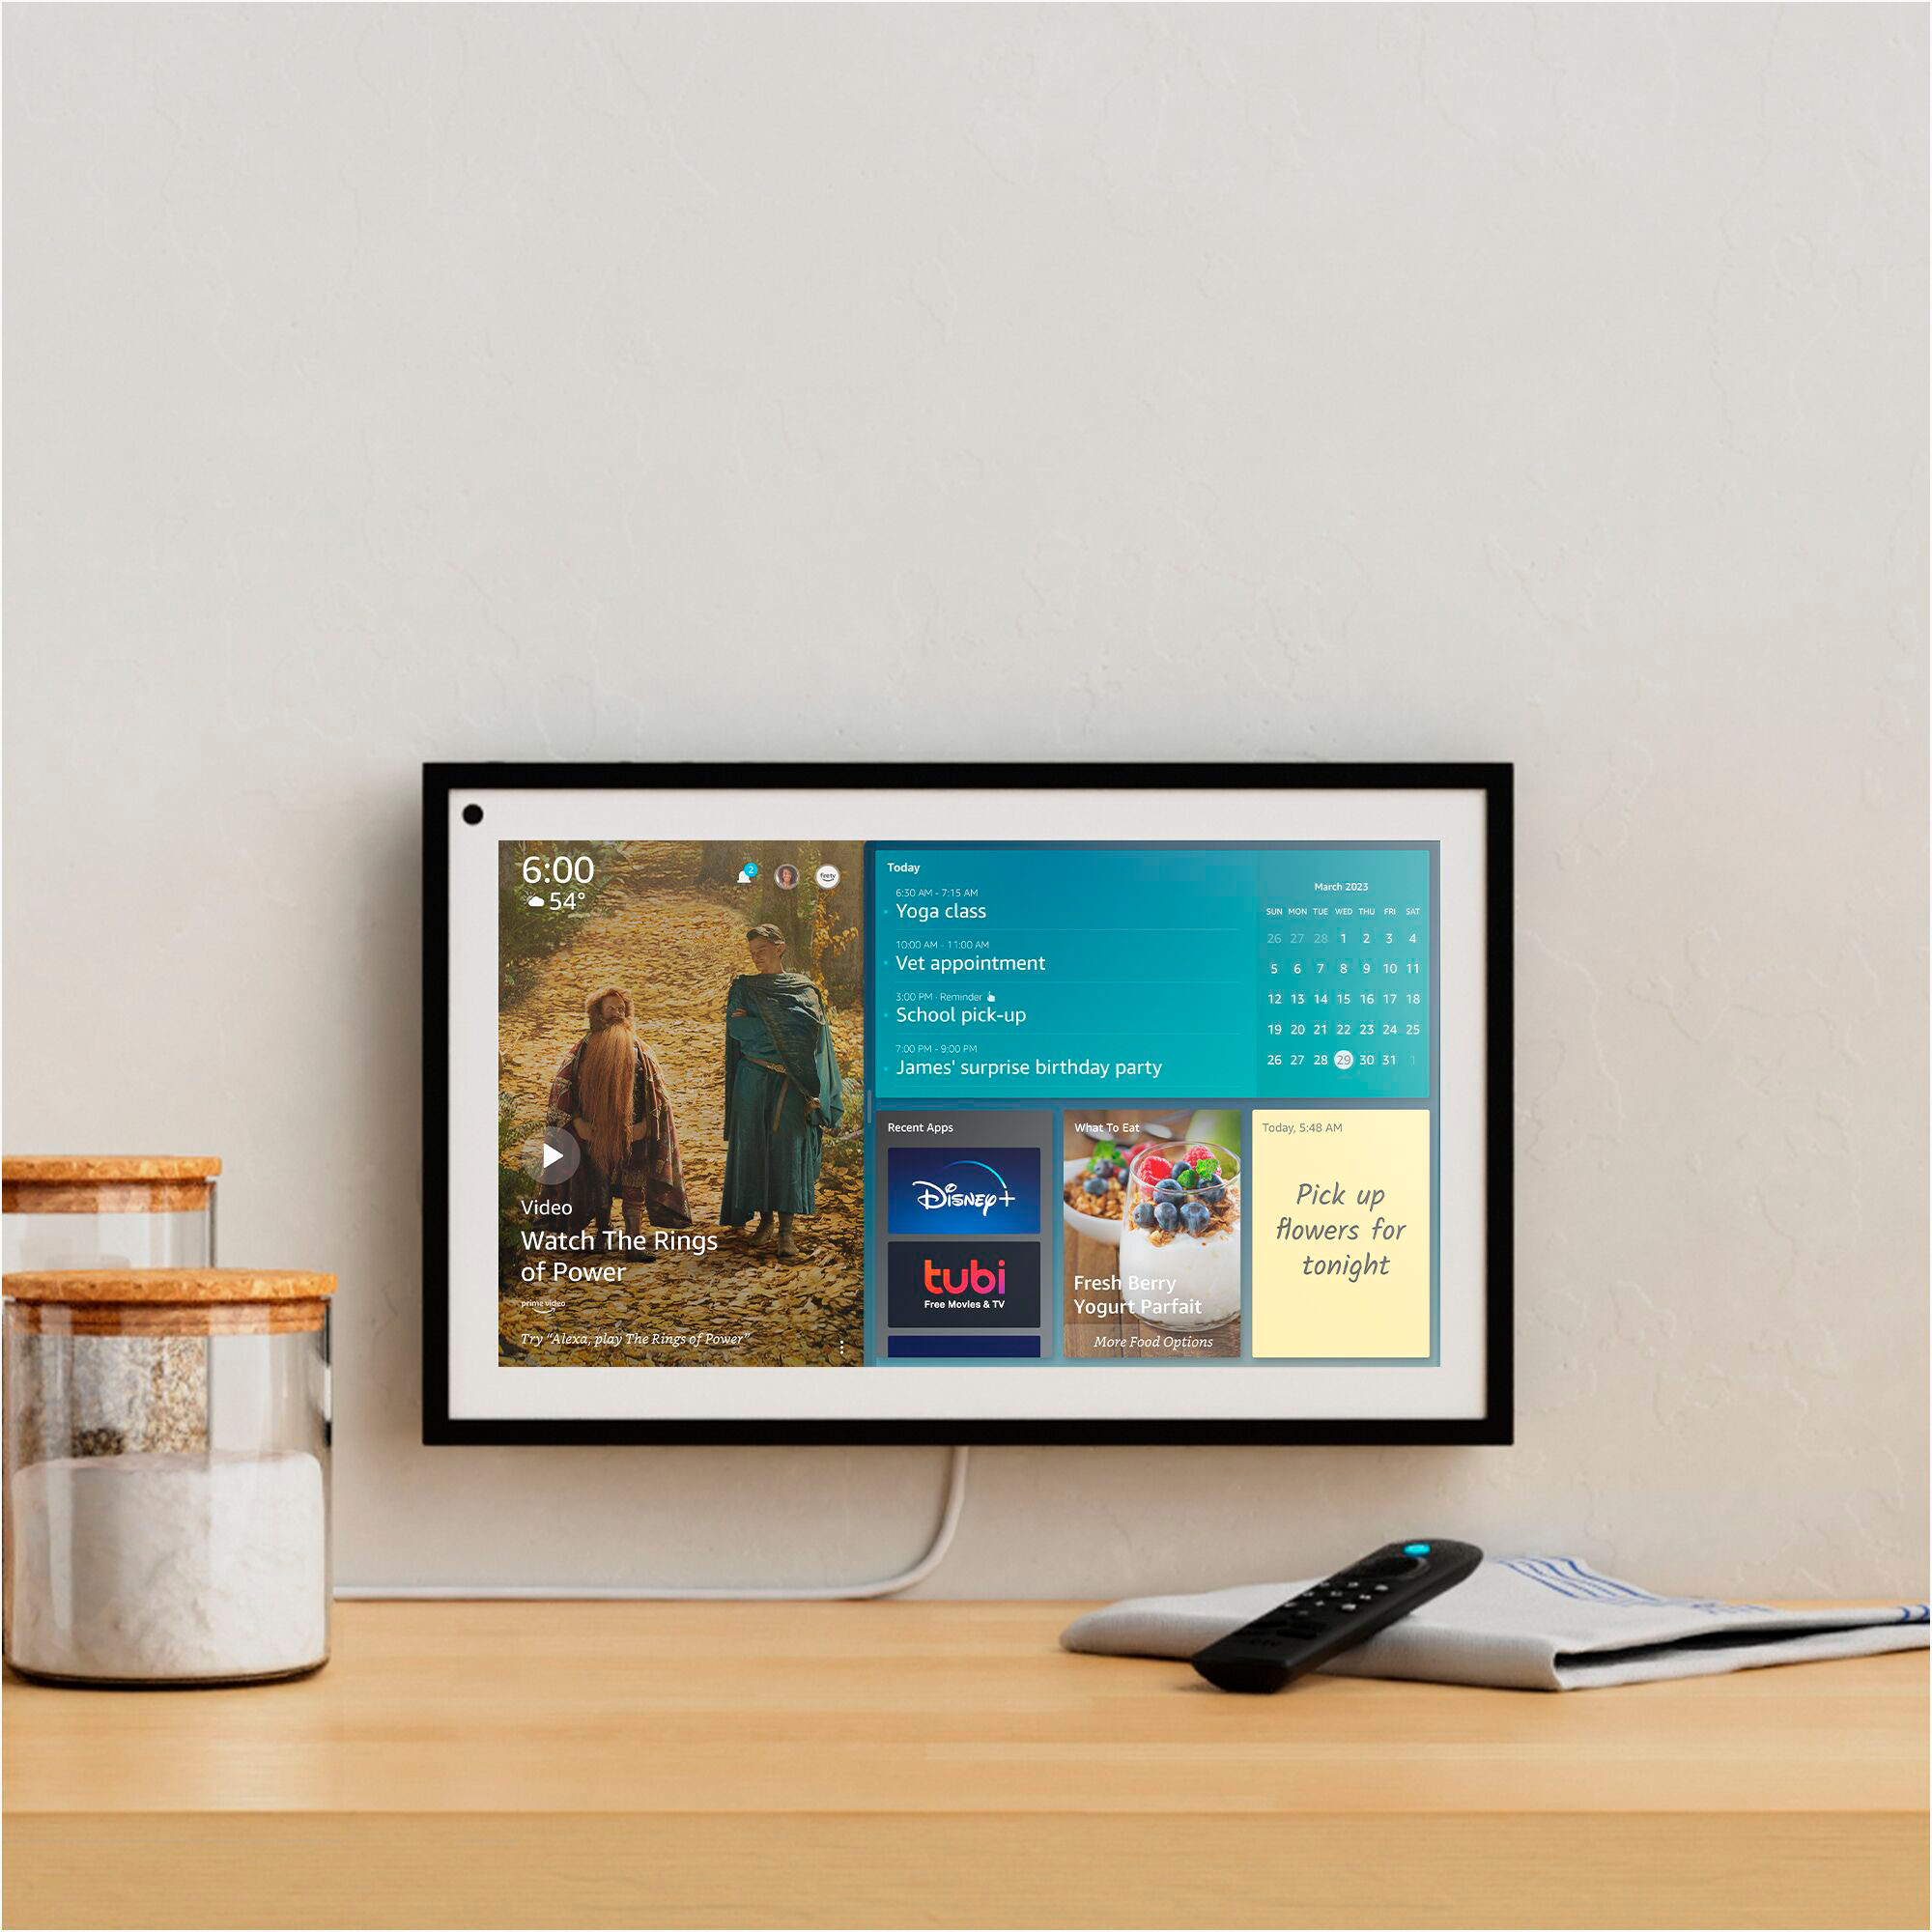  Echo Show 15 15.6 inch Smart Display with Alexa and Fire TV - Black